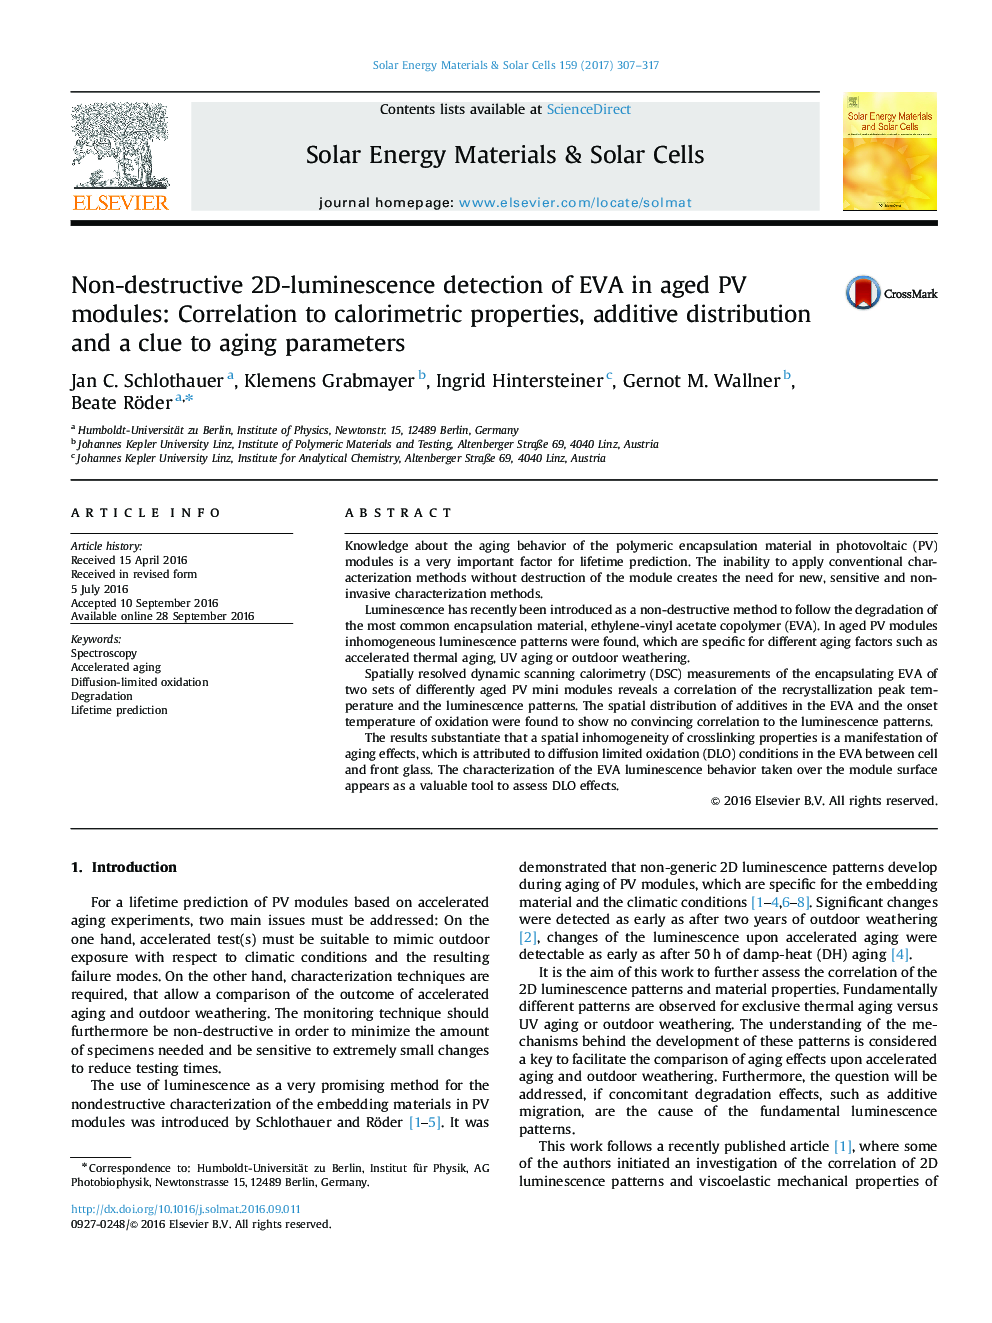 Non-destructive 2D-luminescence detection of EVA in aged PV modules: Correlation to calorimetric properties, additive distribution and a clue to aging parameters